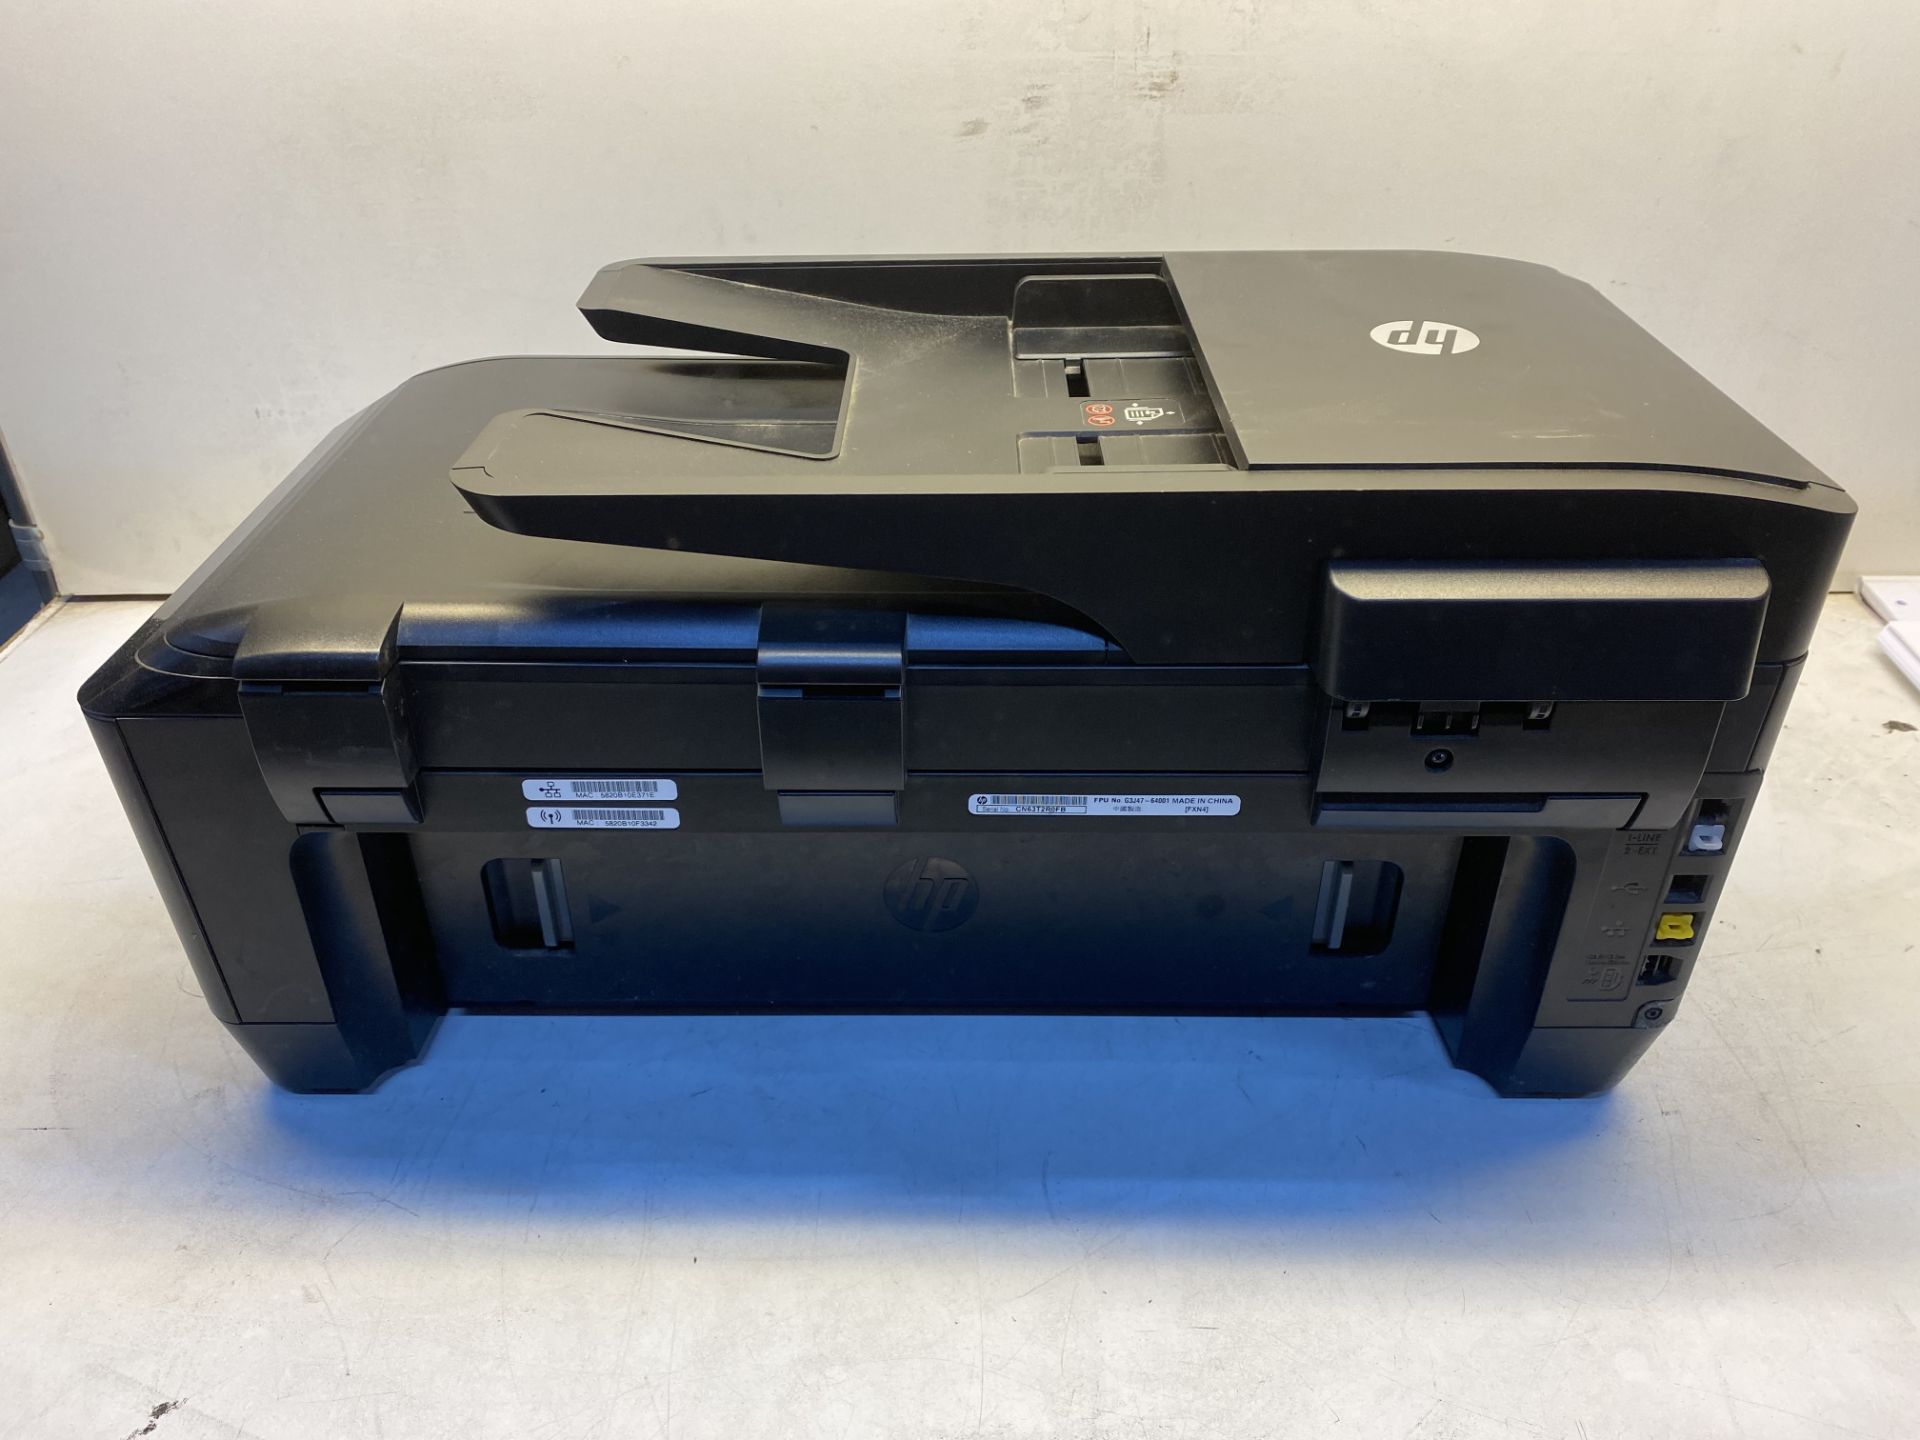 HP OfficJet 7510 Wide Format All-In-One Printer - Image 11 of 12